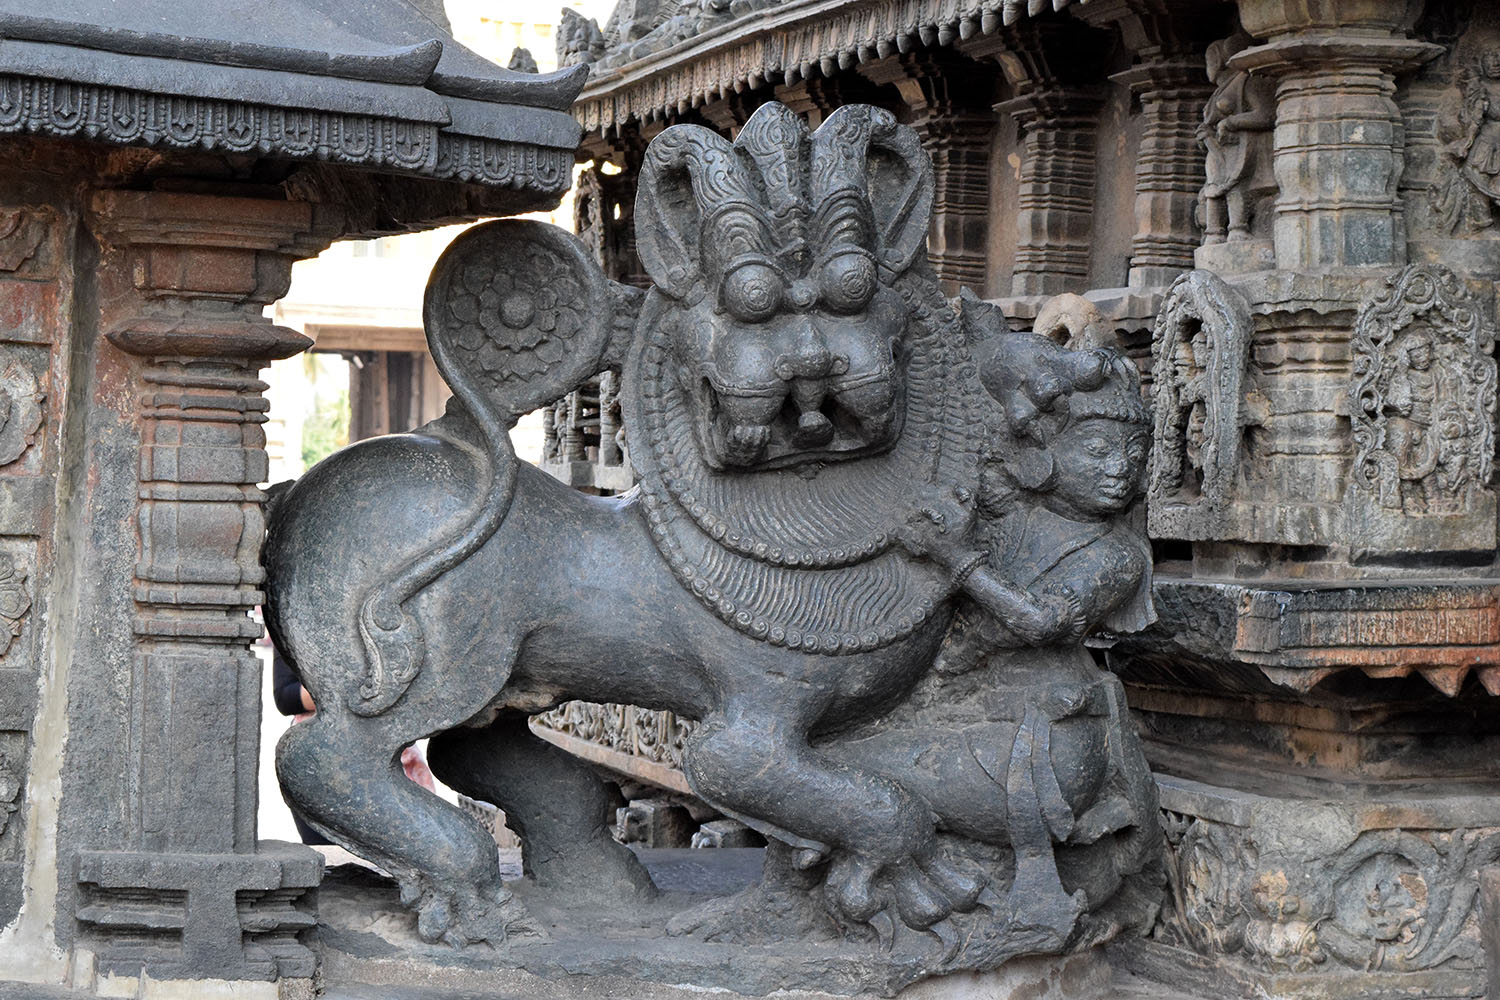 A statue of the mythical creature Yali, who is part lion, elephant and horse, accompanied by a woman seated next to it.